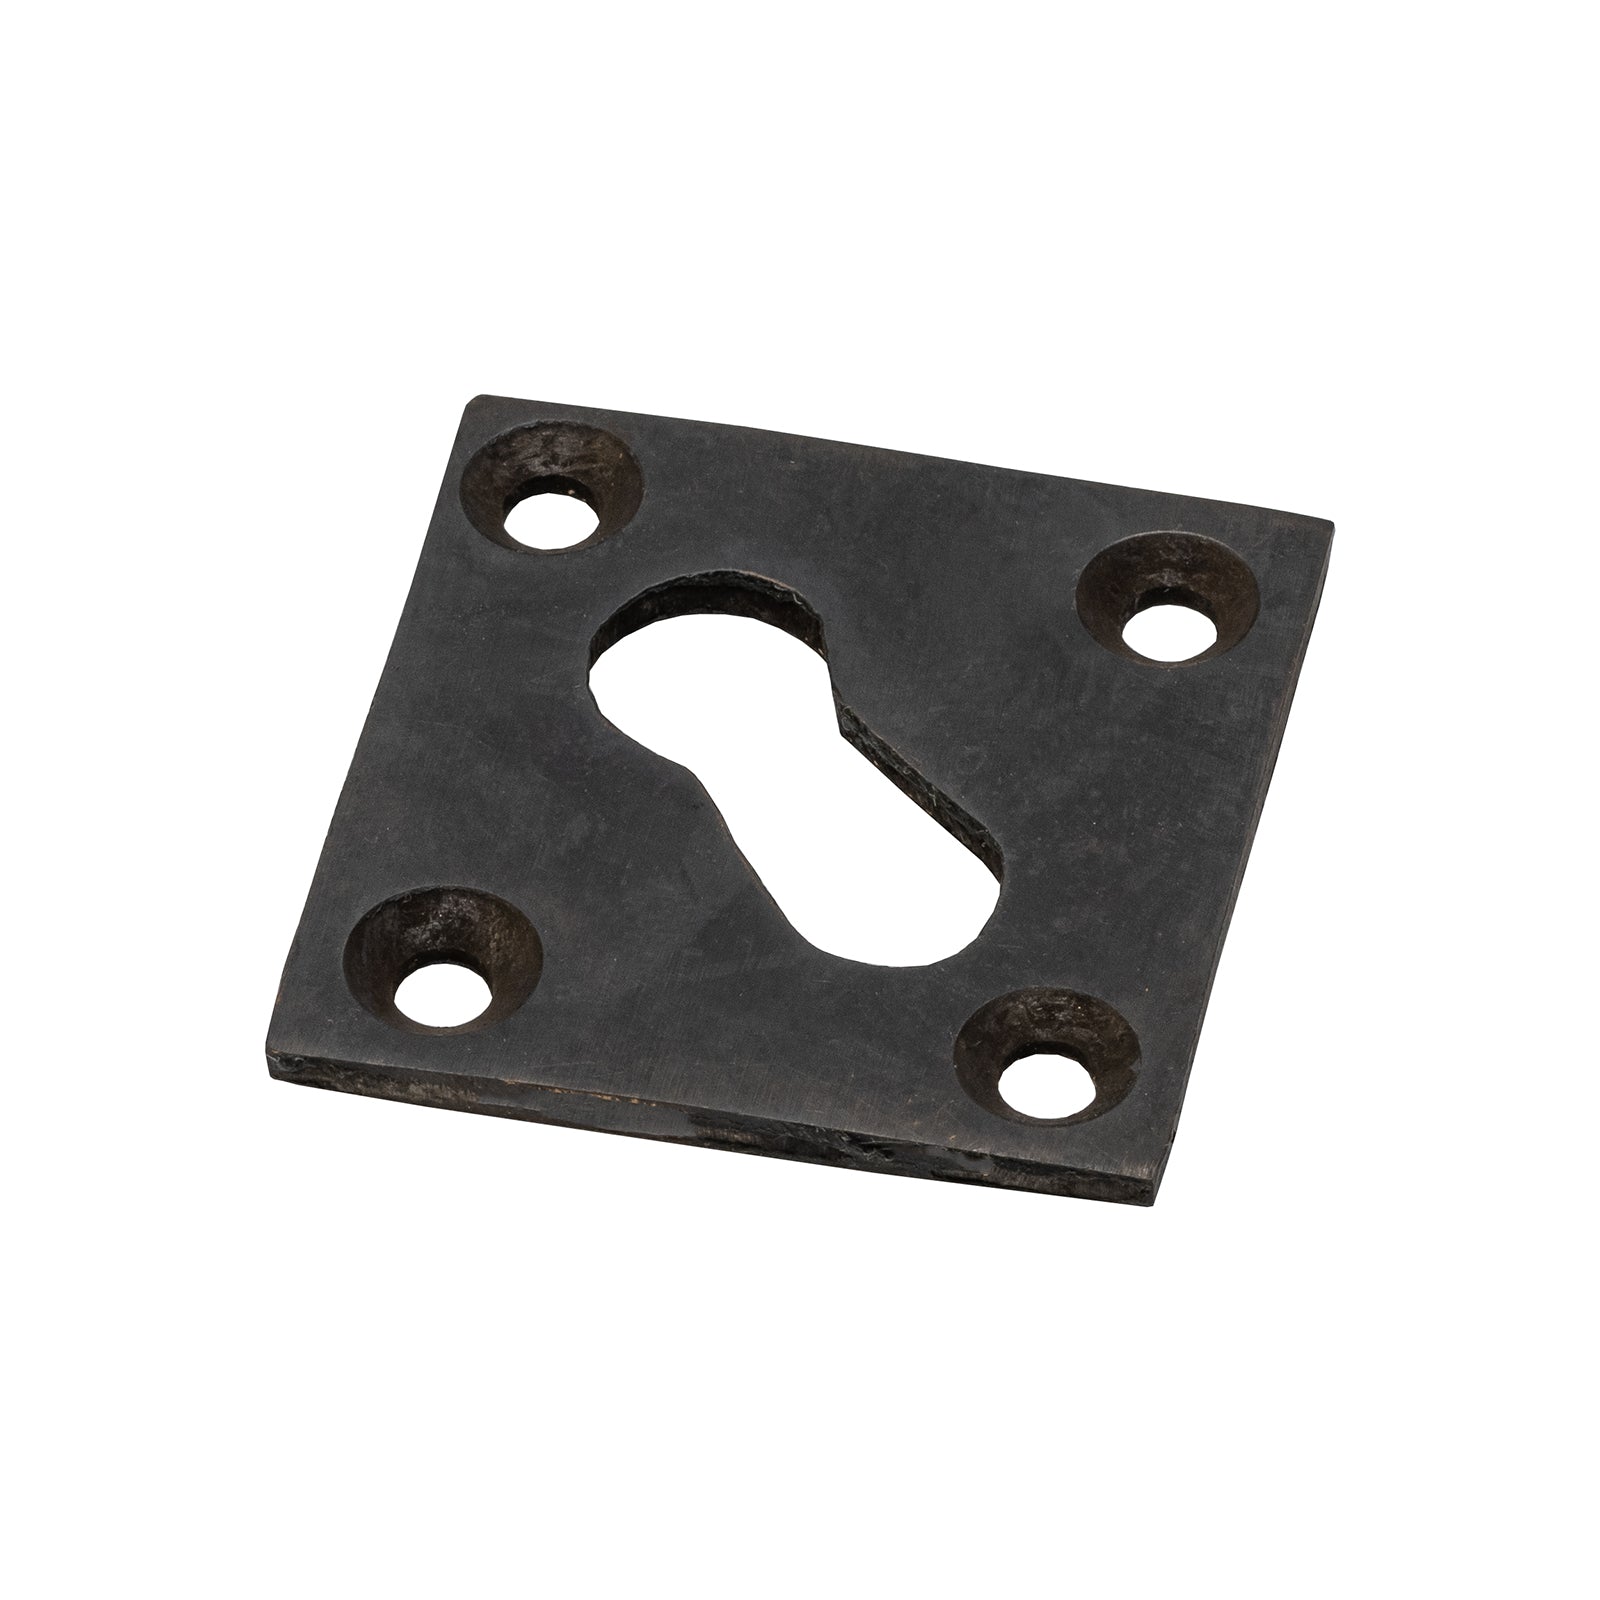 Open keyhole plate in oil rubbed bronze SHOW